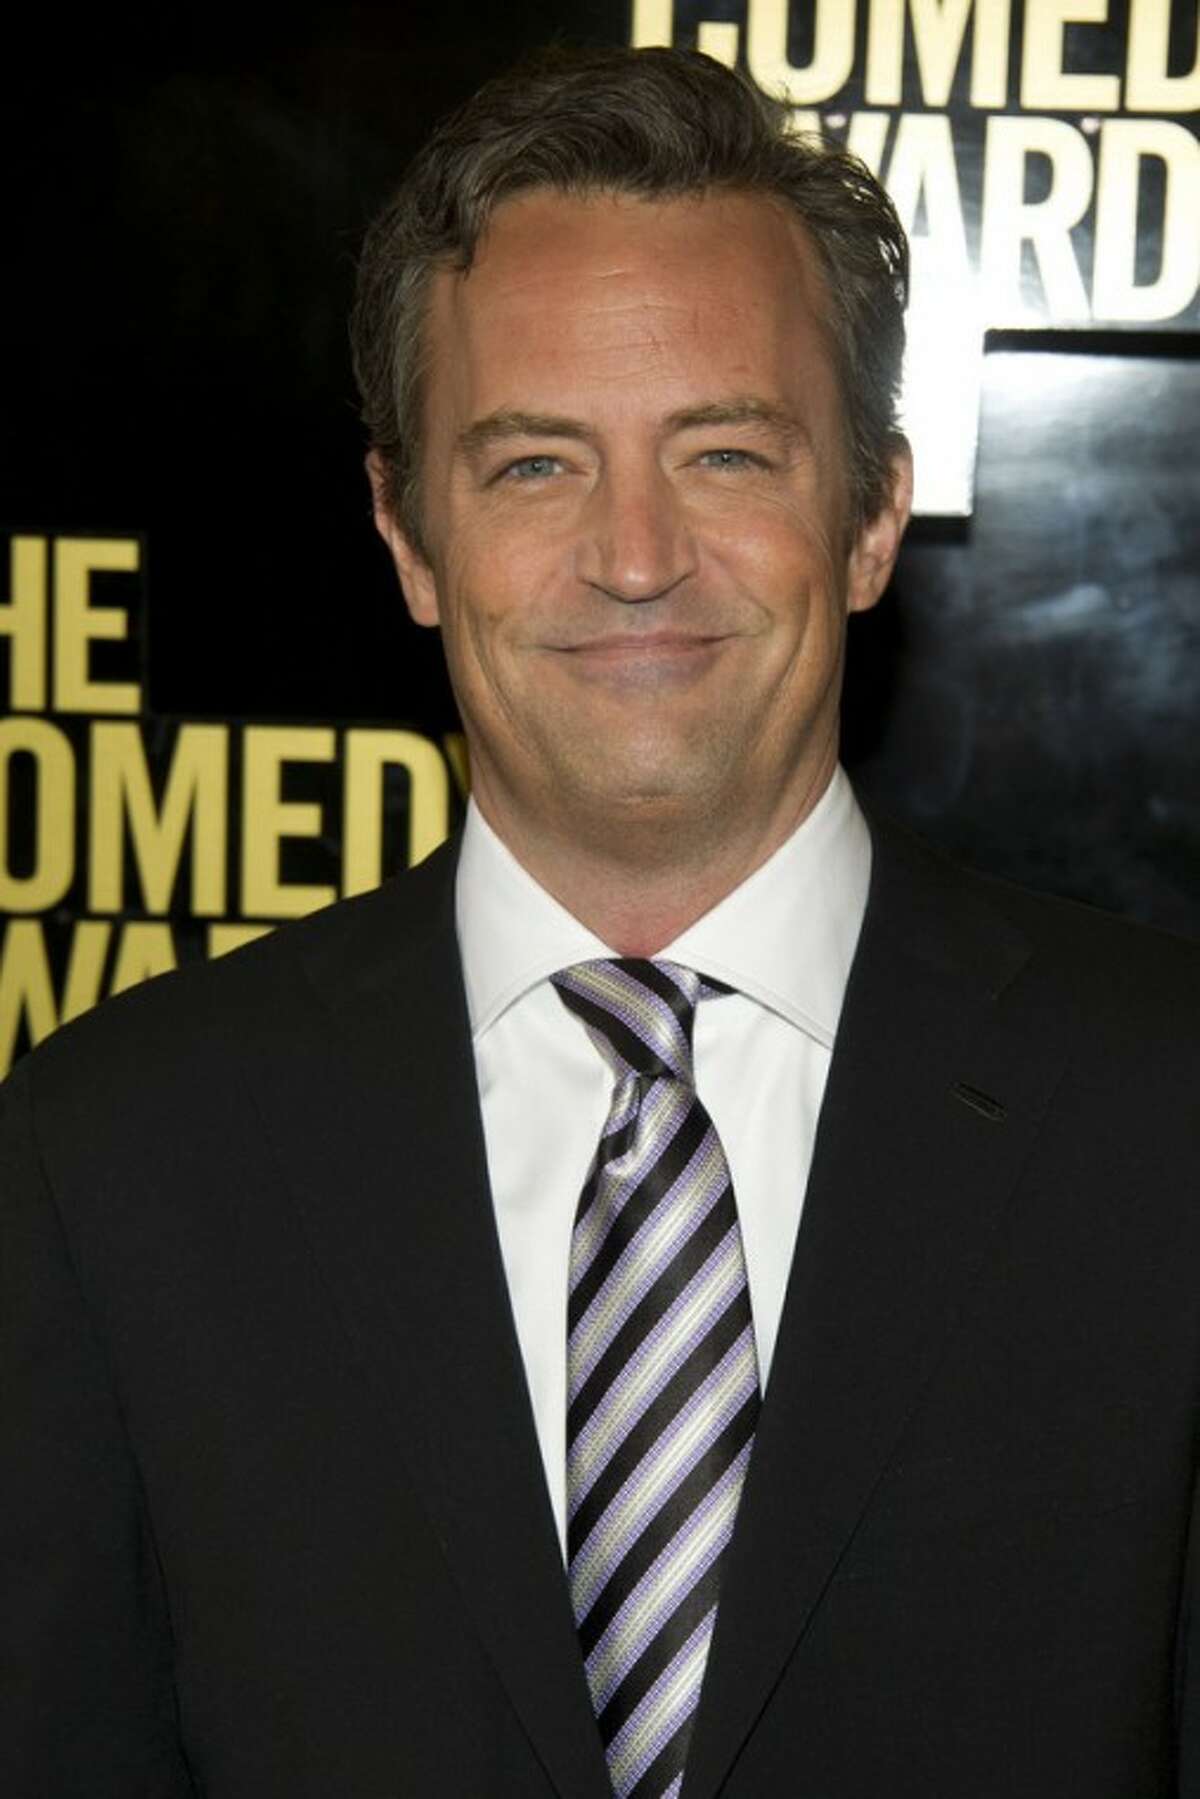 FILE - In this April 28, 2012 file photo, Matthew Perry arrives to The 2012 Comedy Awards in New York. Hoping to lure viewers with laughs, struggling NBC is calling on old friend Matthew Perry to lend a hand. The TV network unveiled a fall schedule on Sunday that has 10 sitcoms, double the number of dramas it will air, including "Go On," starring Perry as a fast-talking, sarcastic sportscaster who loses his wife in a car accident. (AP Photo/Charles Sykes, File)